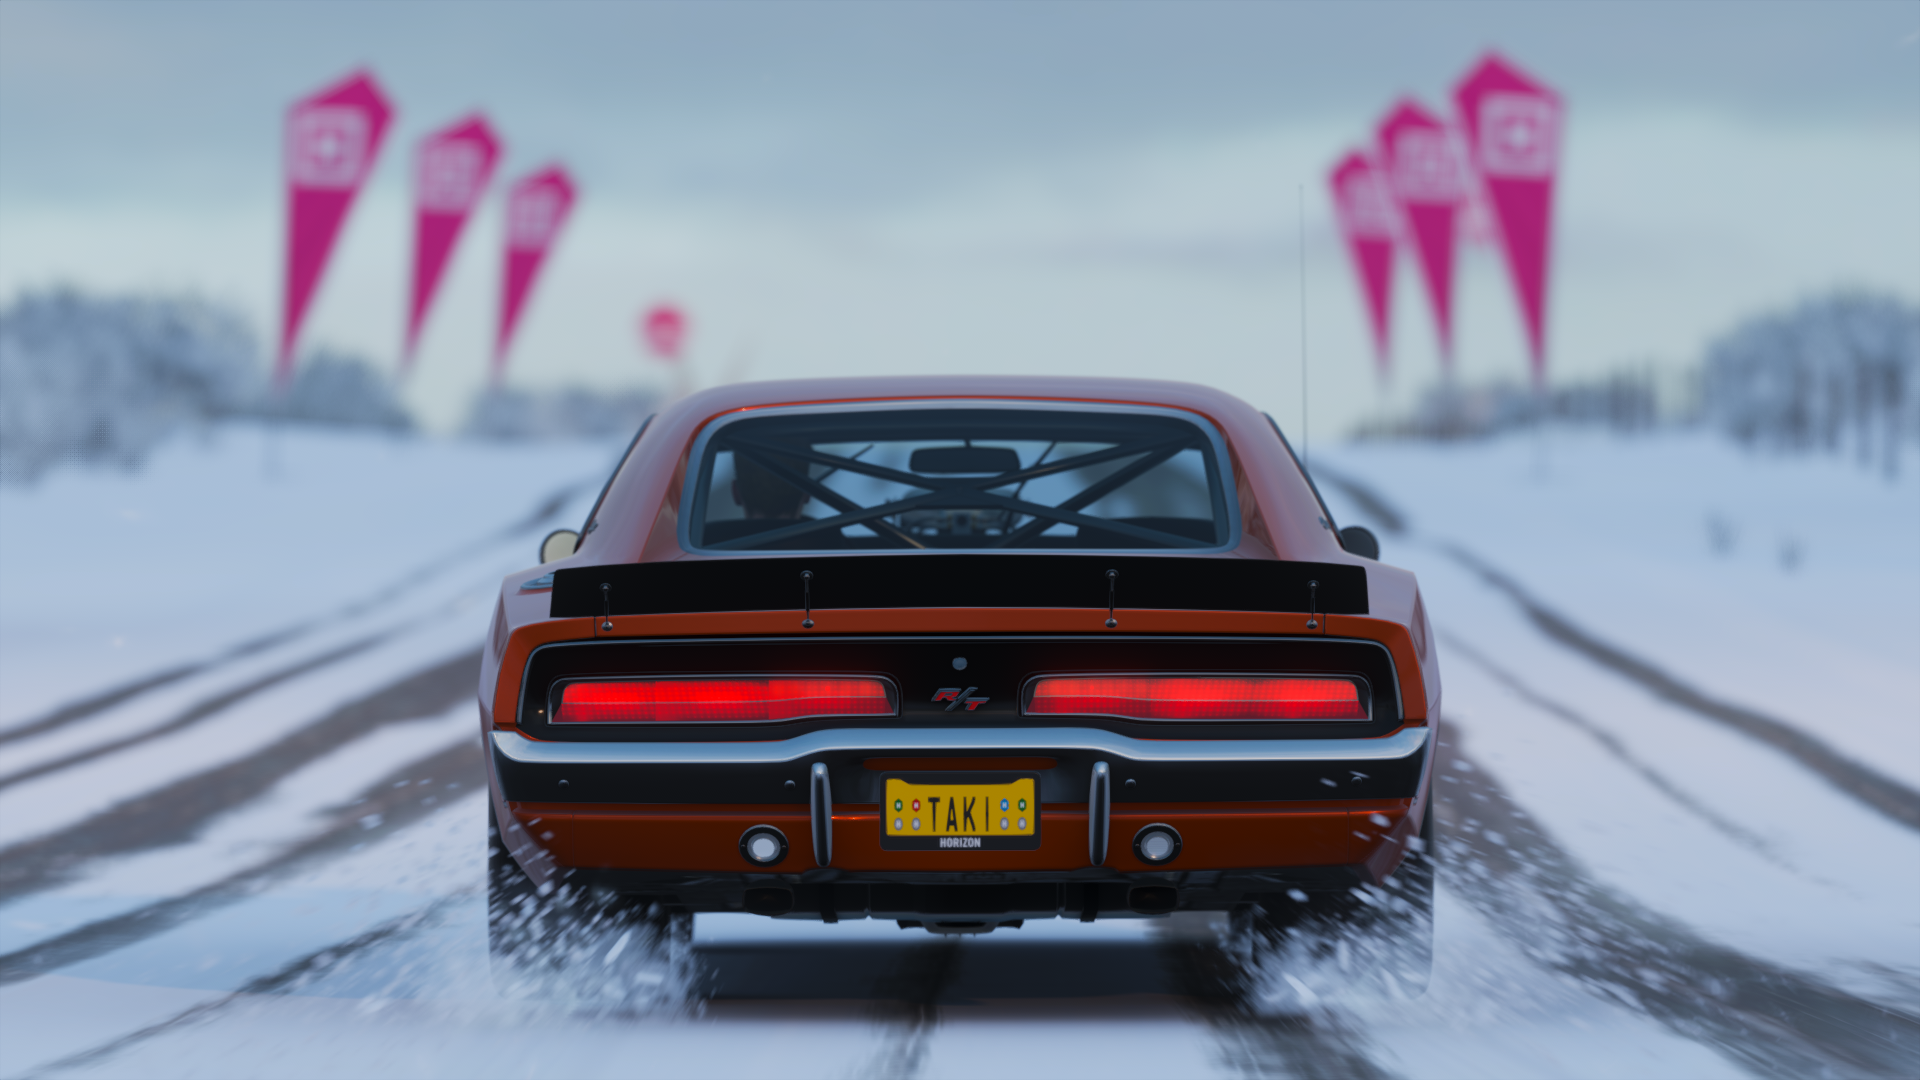 General 1920x1080 Forza Horizon 4 car racing Dodge Dodge Charger muscle cars V8 engine American cars Turn 10 Studios PlaygroundGames Xbox Game Studios